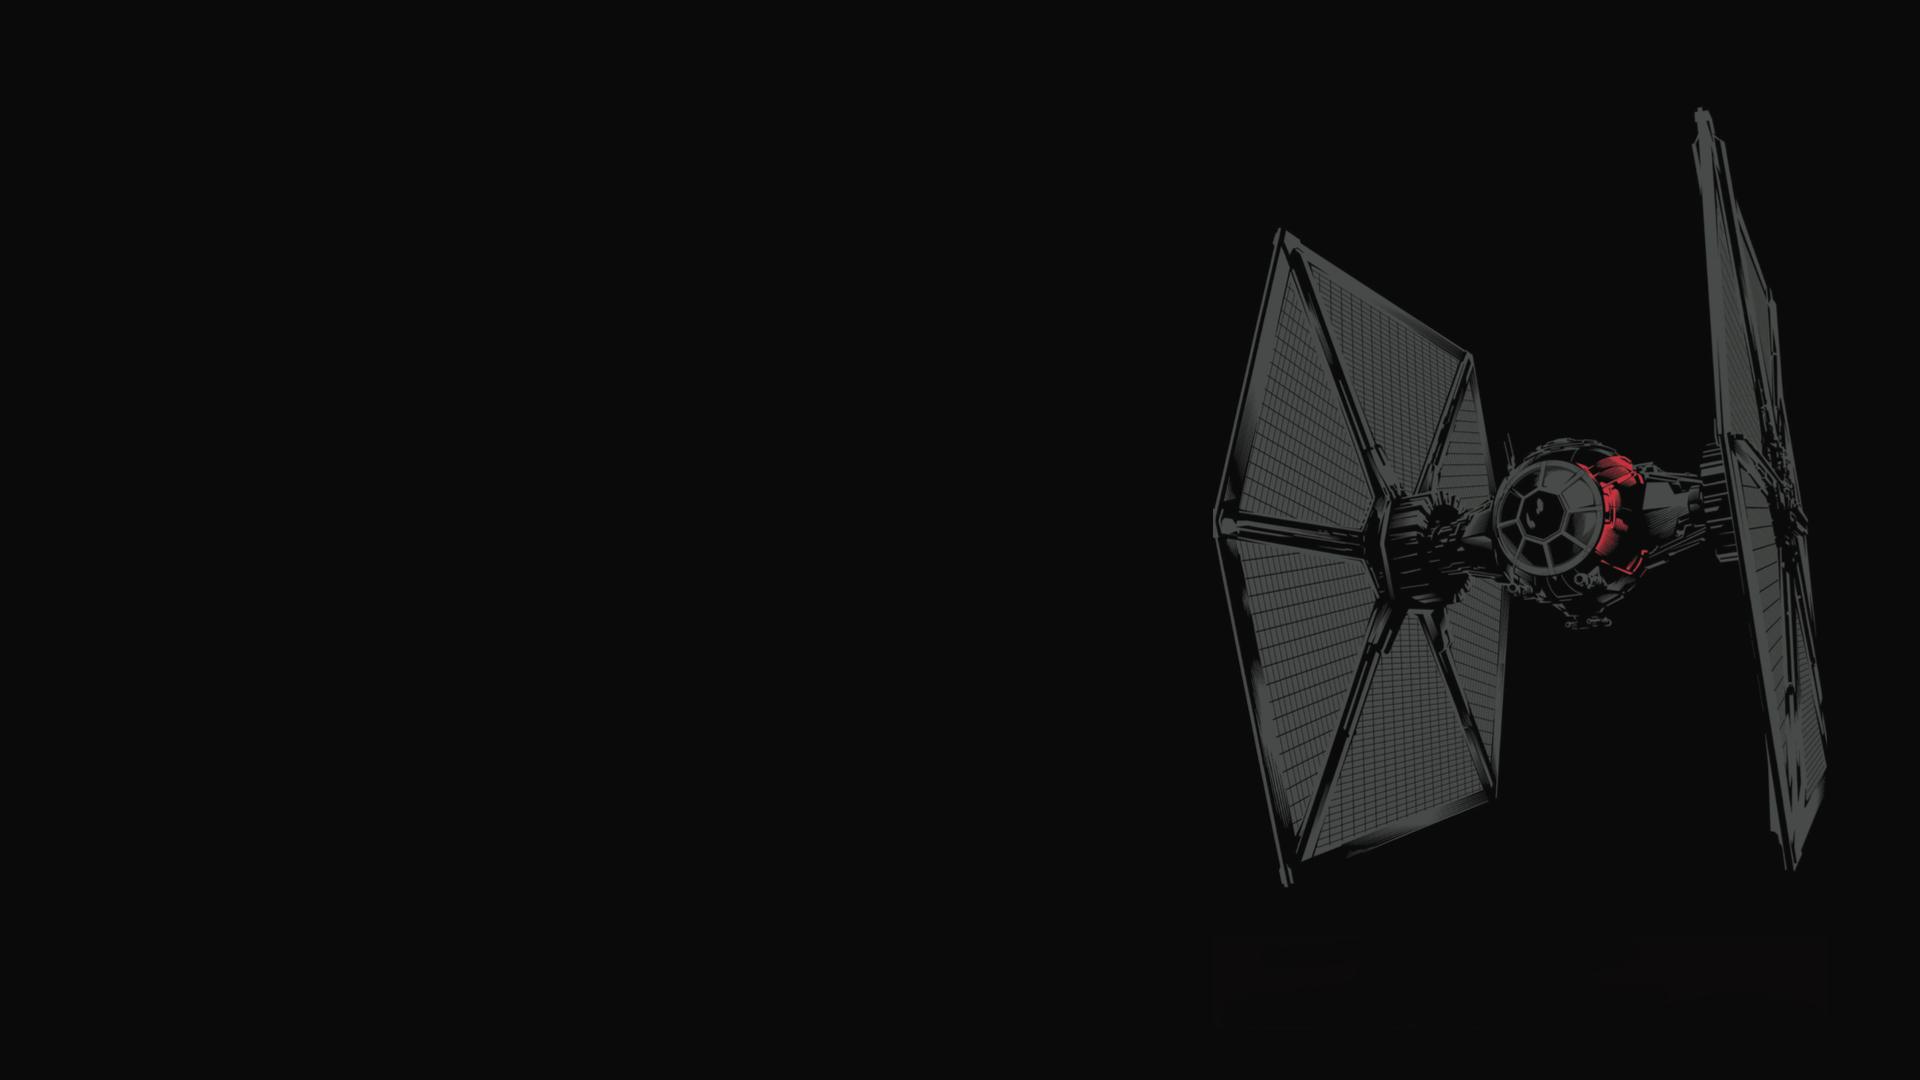 I made a wallpapers out of that TIE Fighter Wallpaper from the toy leak